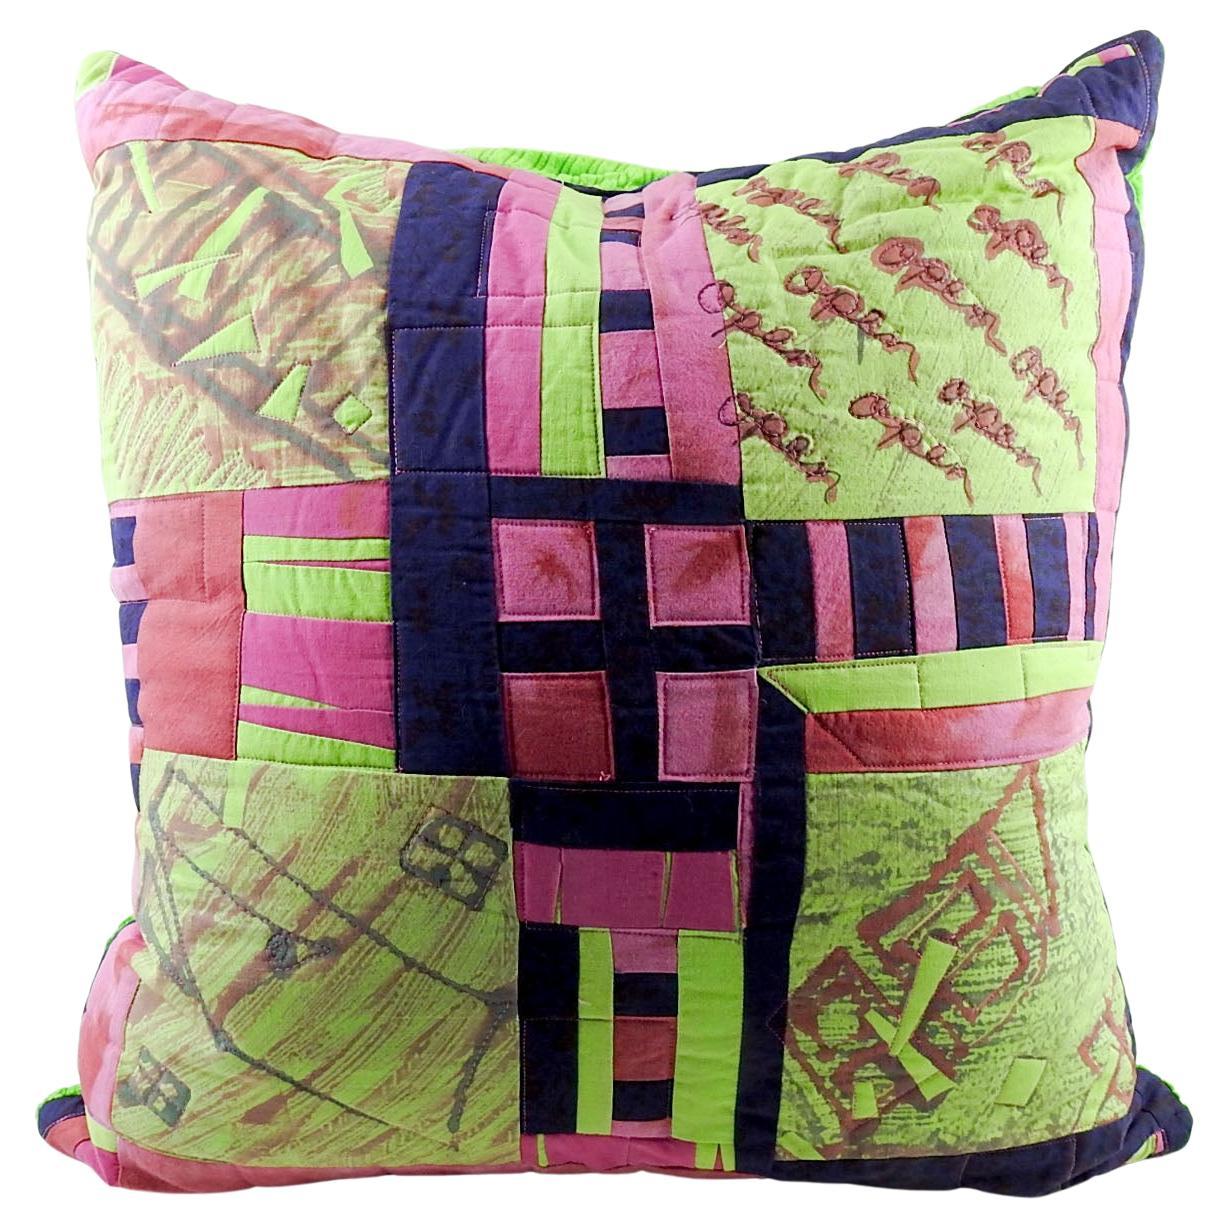 Artist Quited Green & Pink Monoprint Pillow For Sale